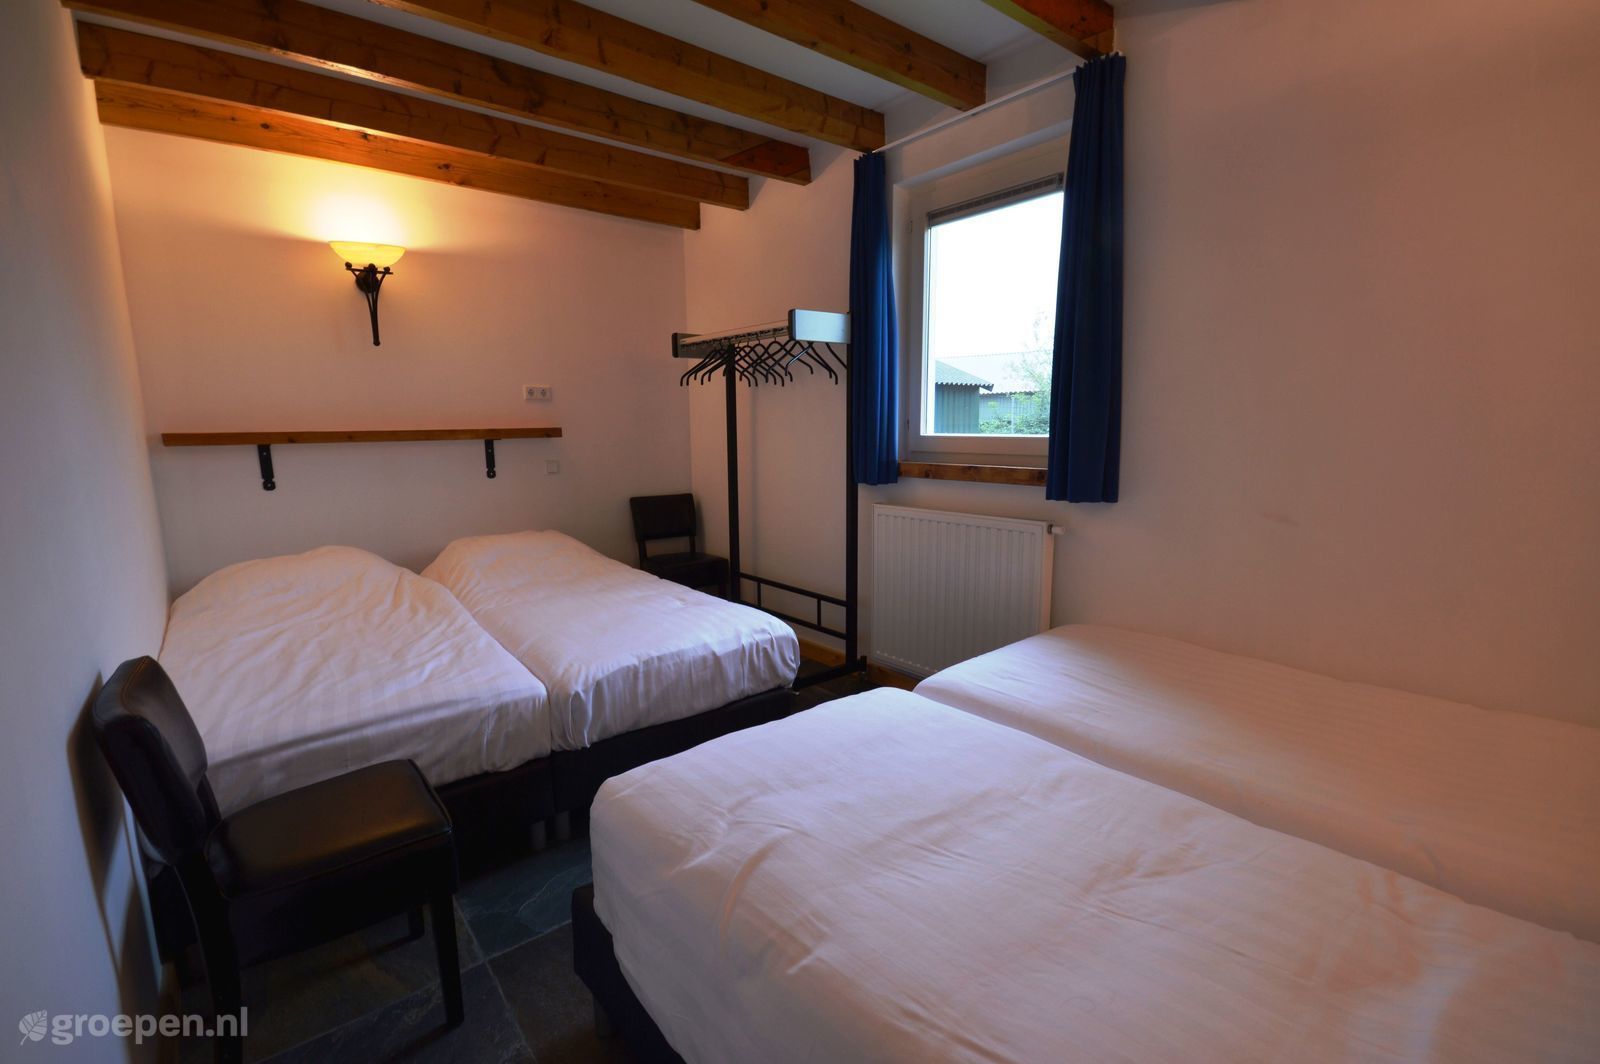 Group accommodation Heeswijk-Dinther